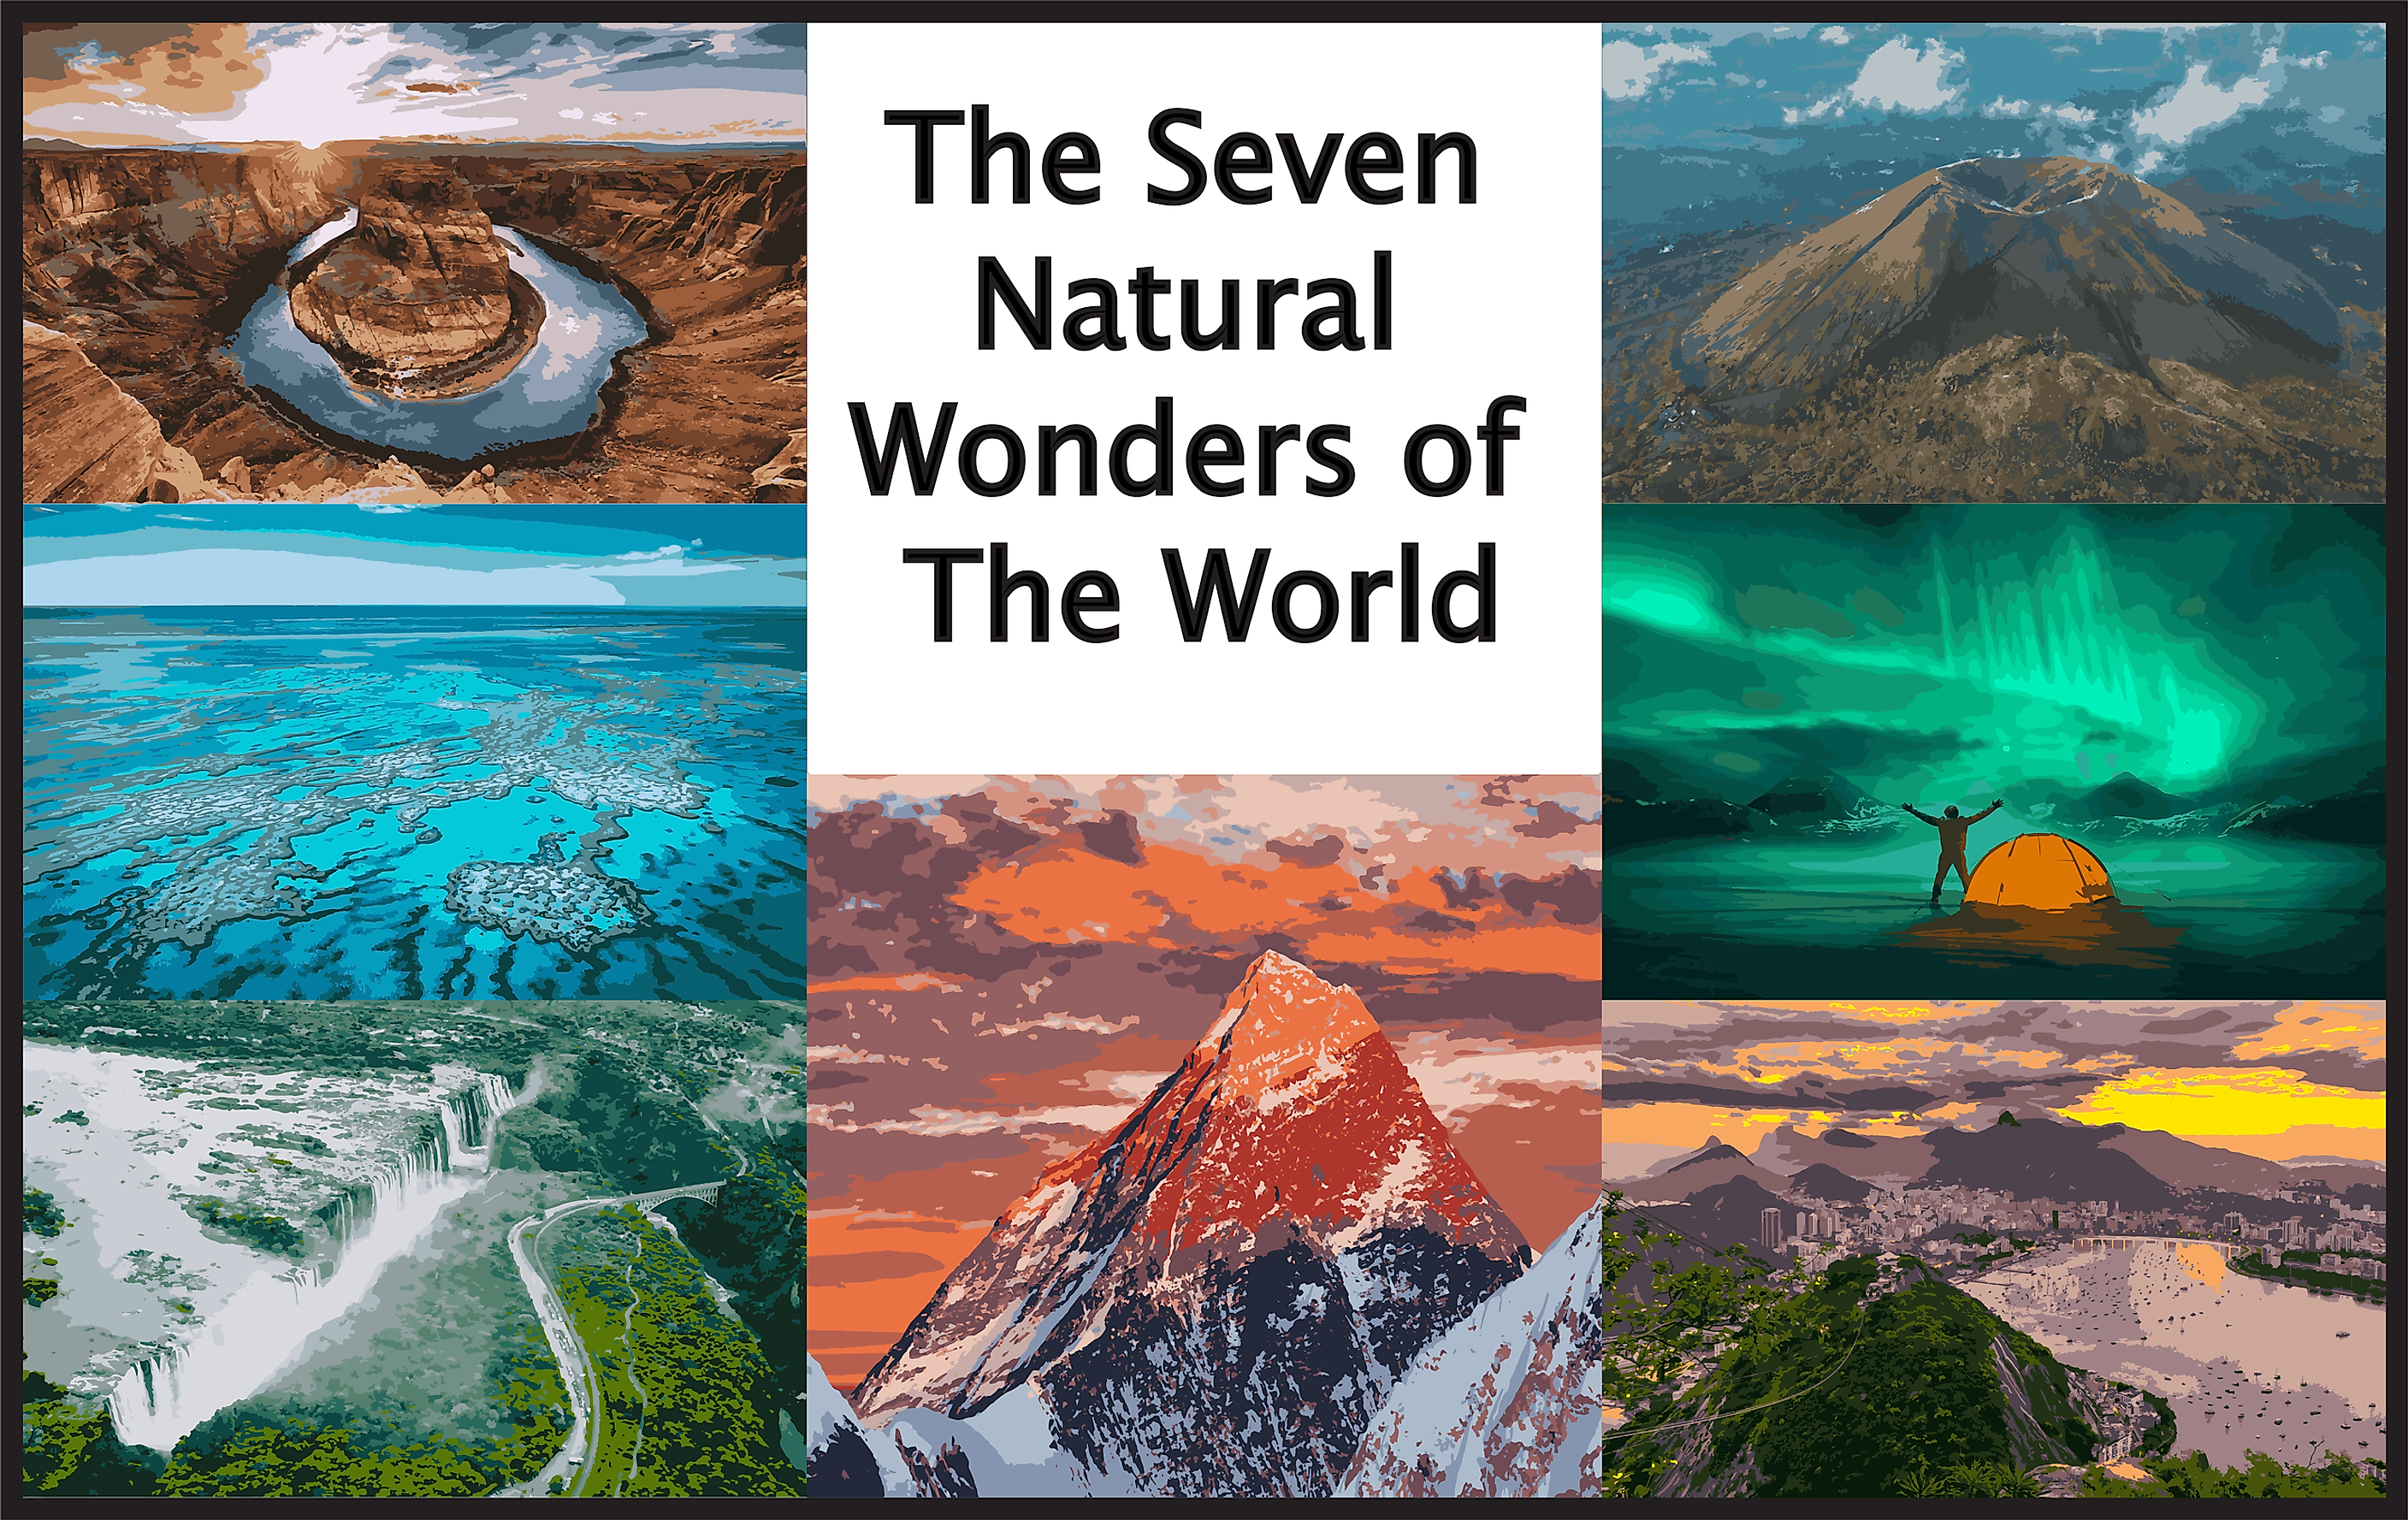 7 wonders of the world wallpapers with name